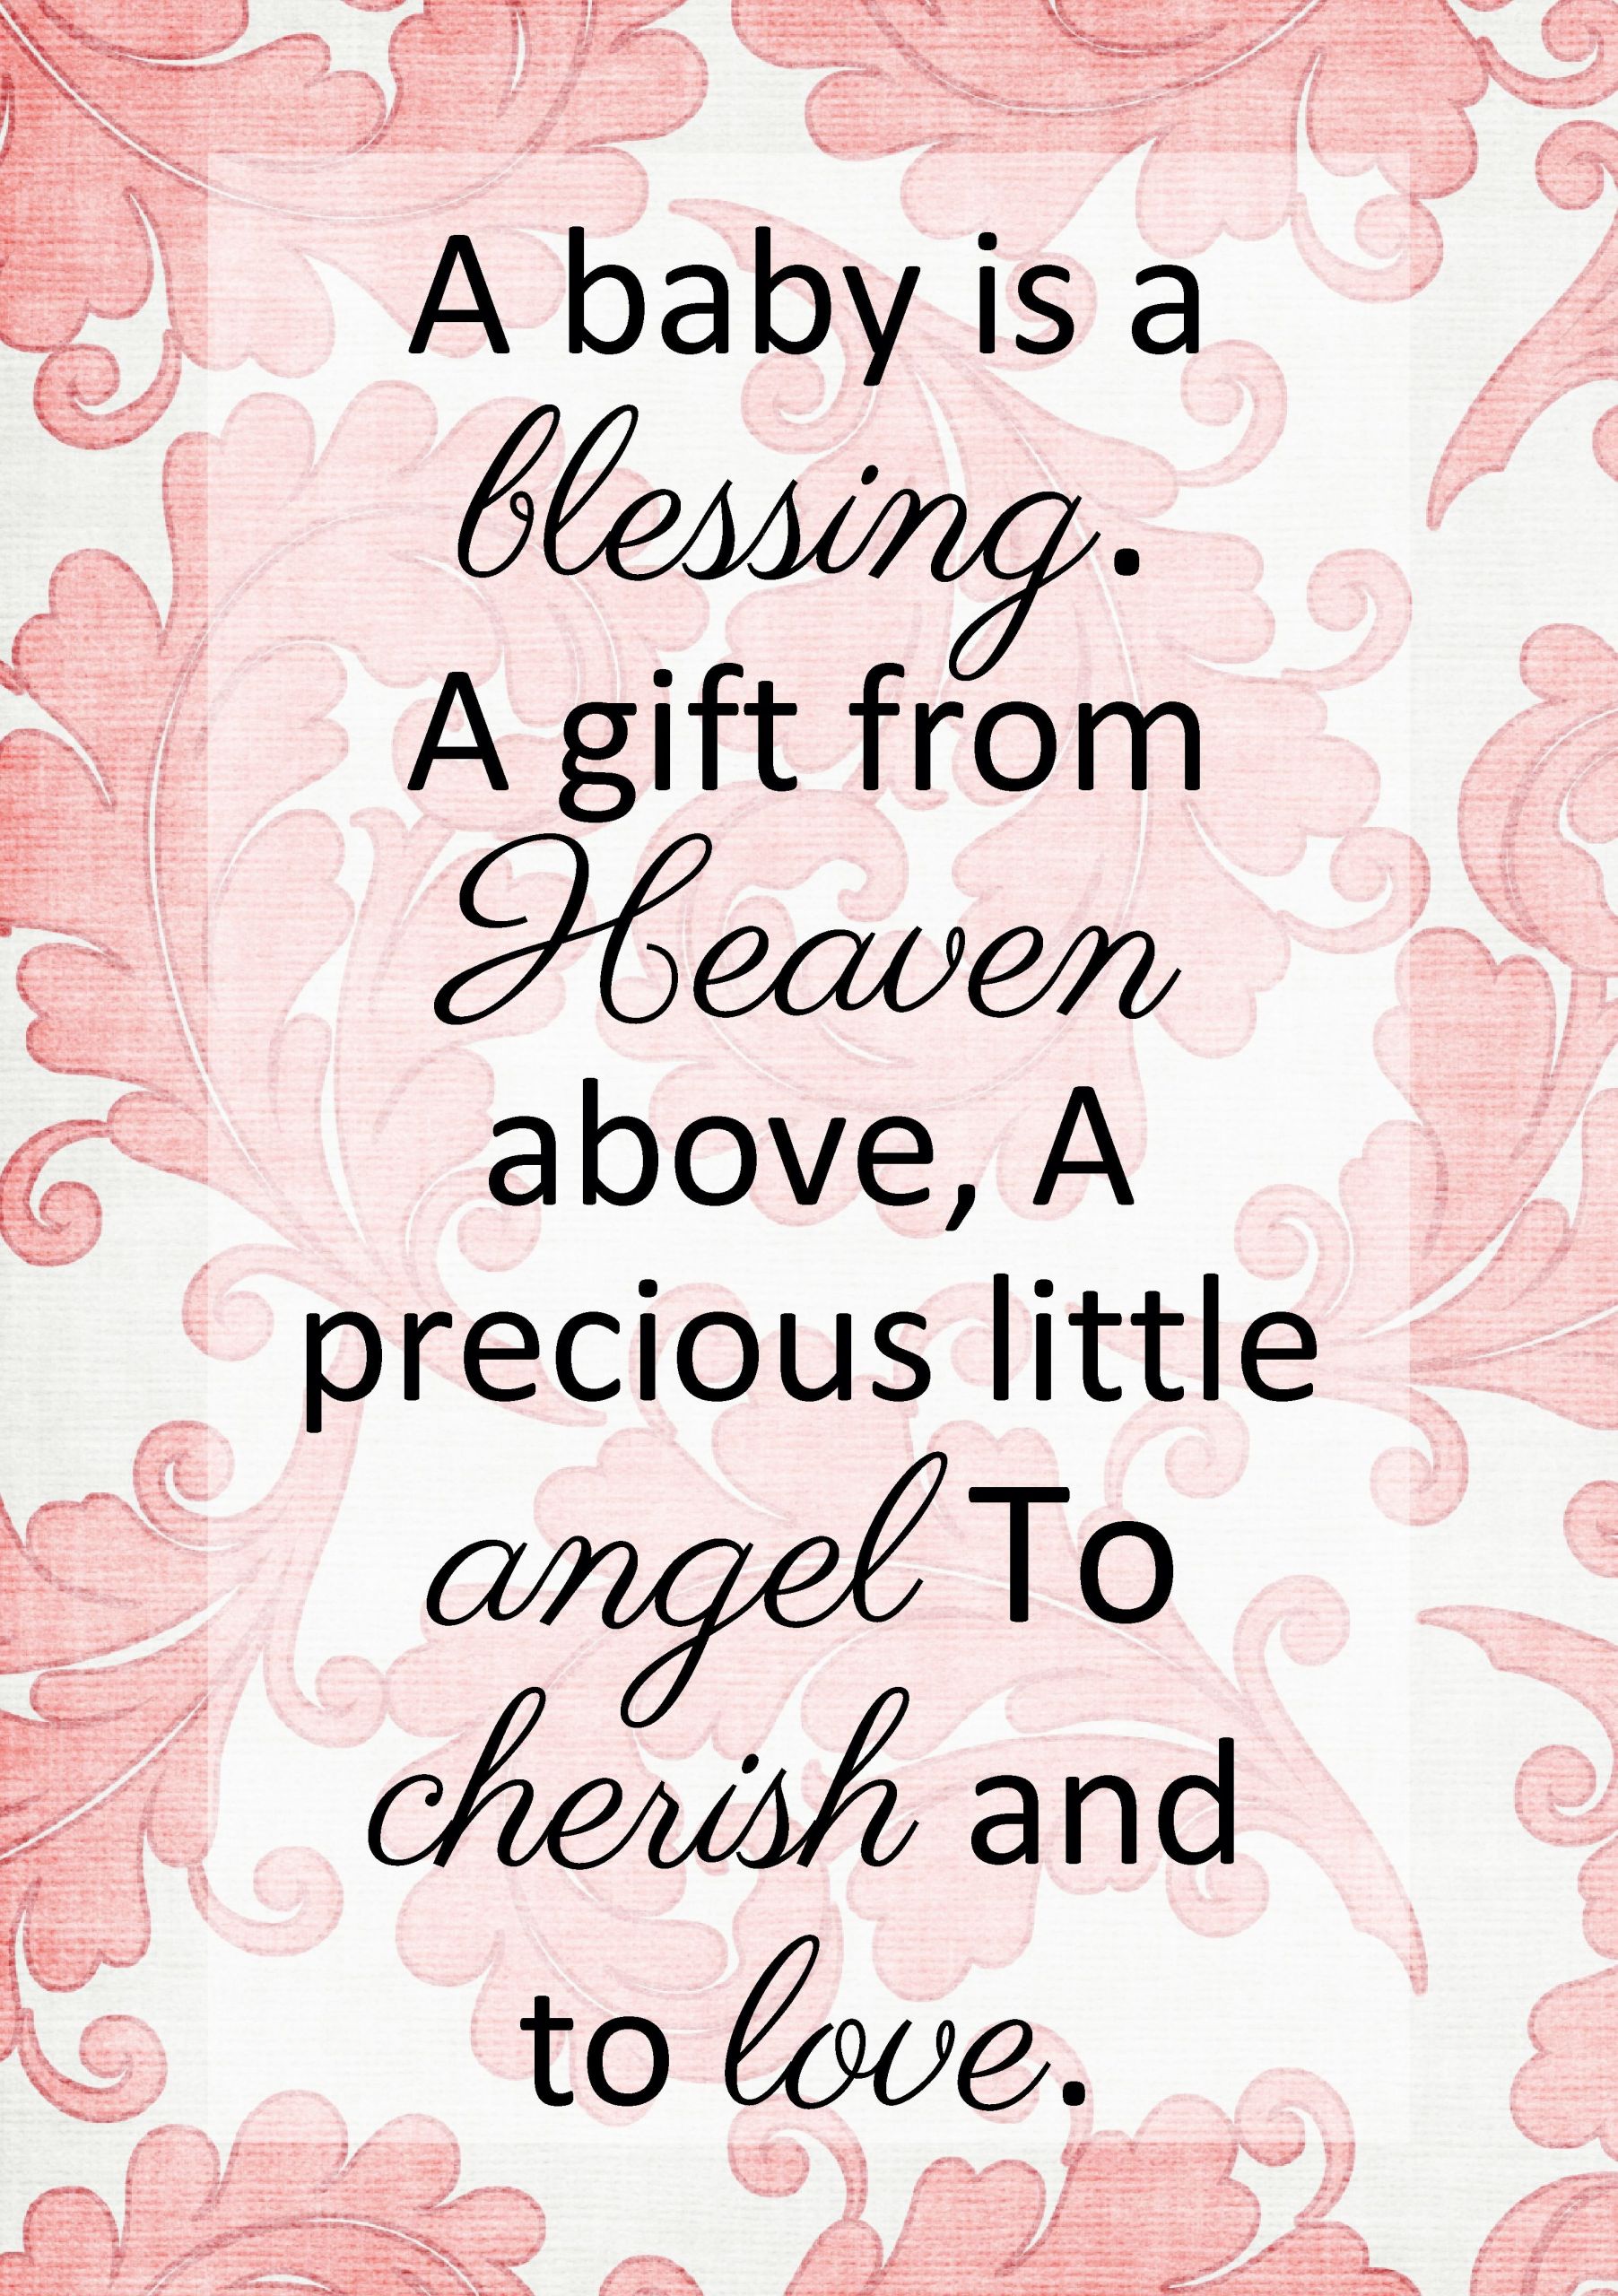 Blessed With A Baby Girl Quotes
 A Baby is a Blessing a t from Heaven above A precious